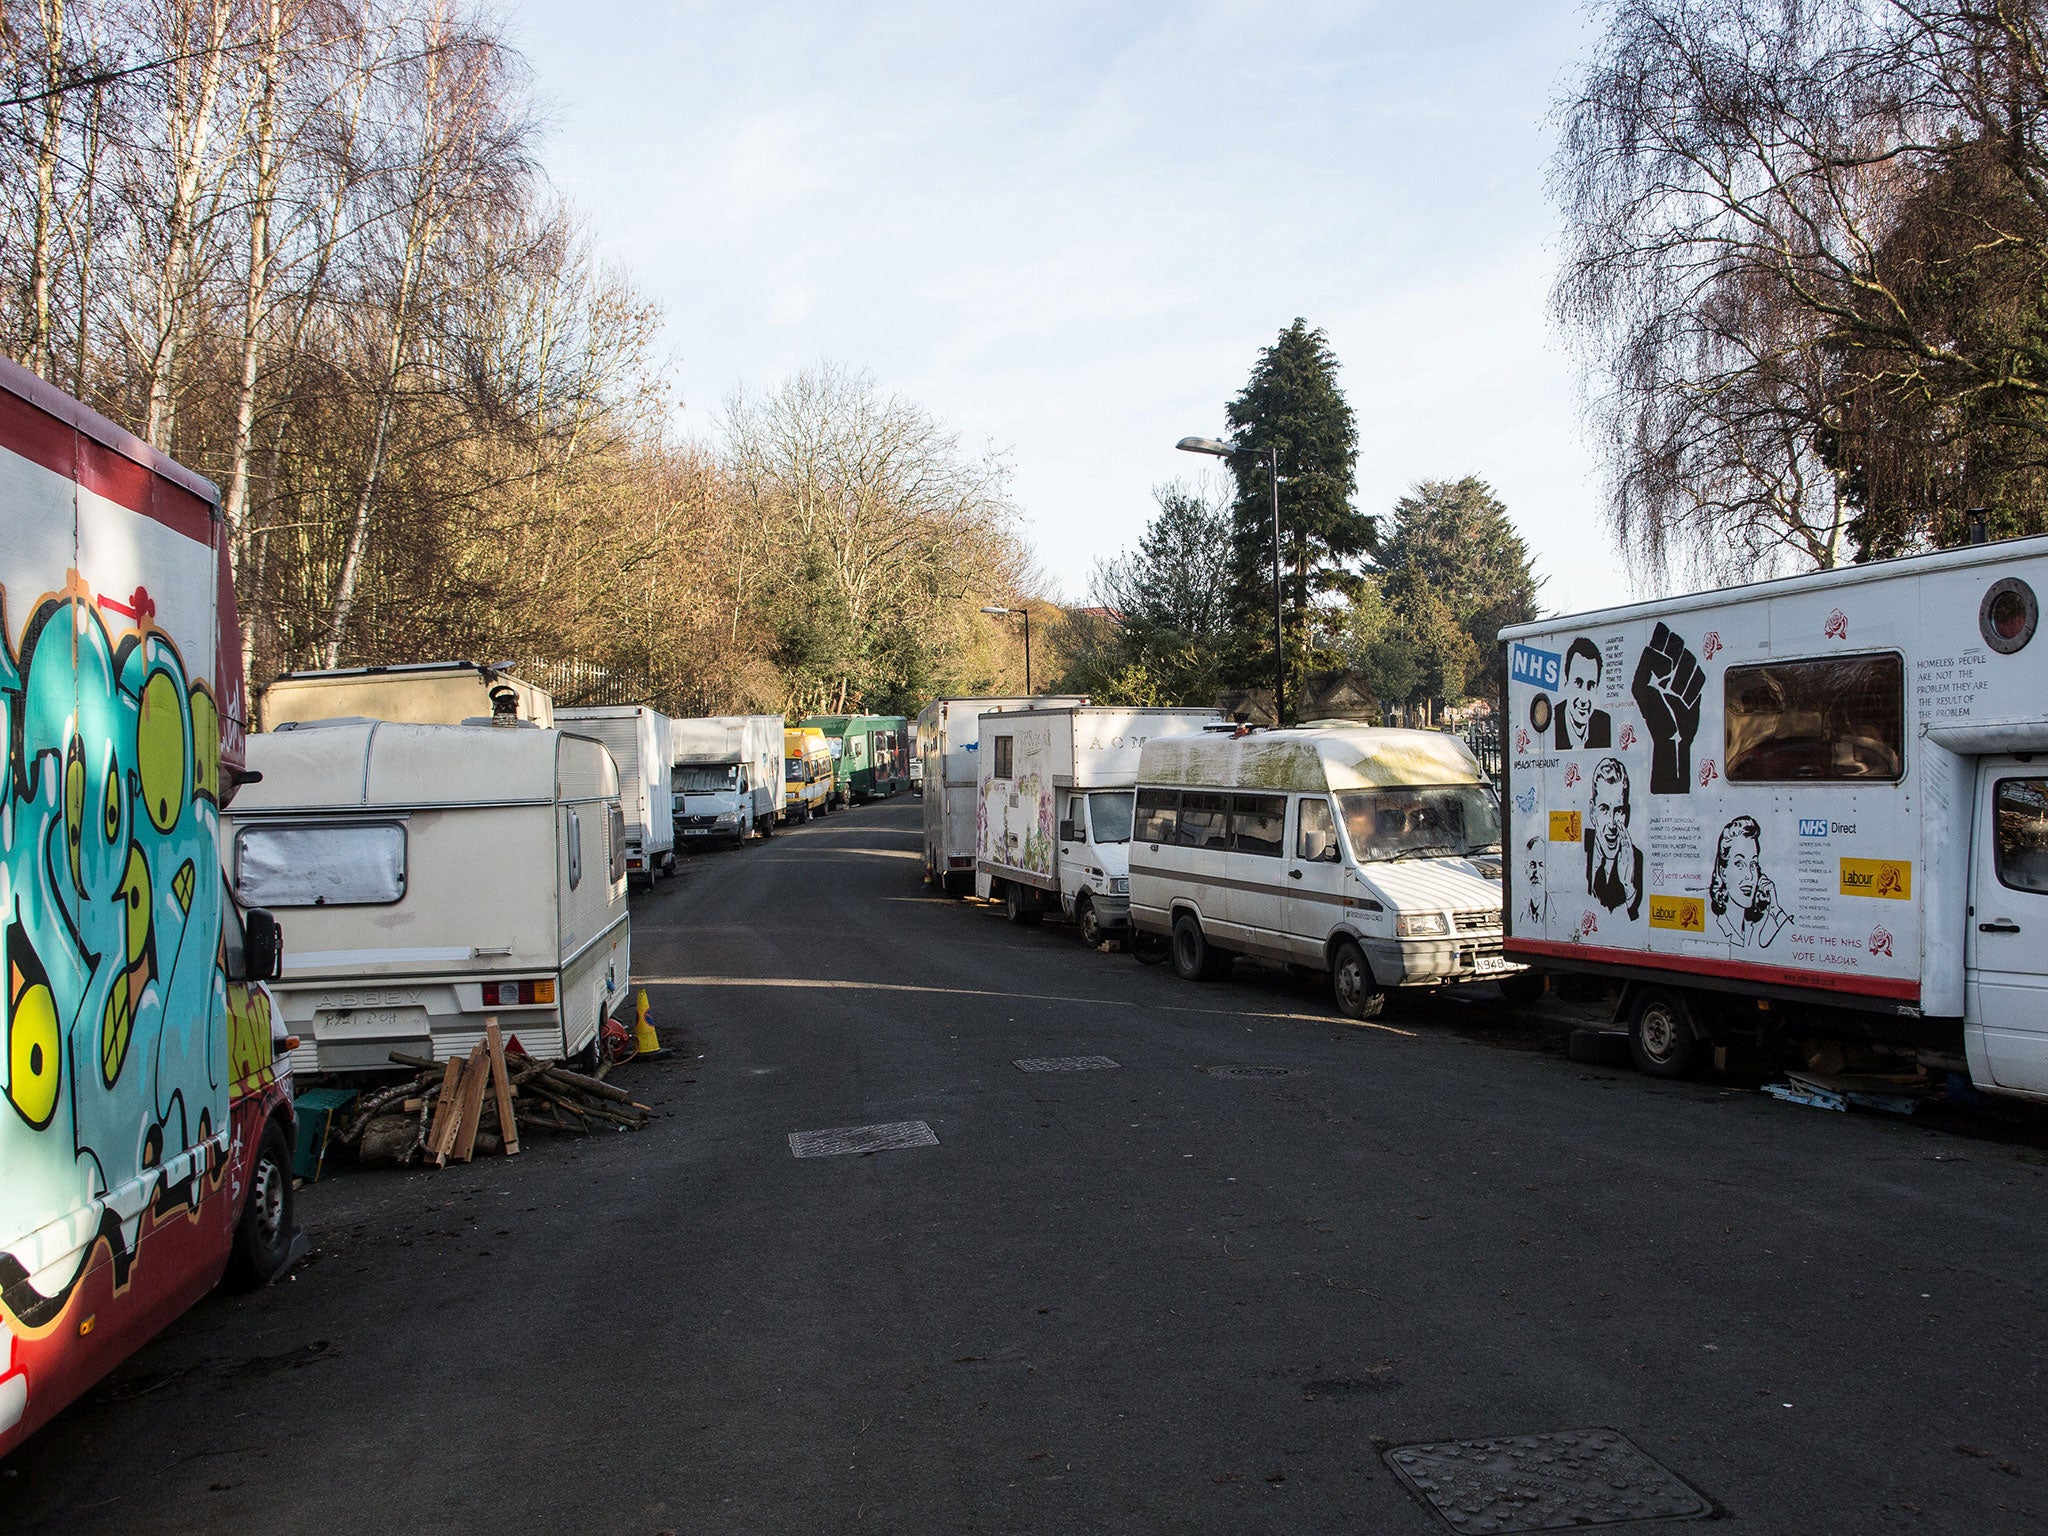 Encampment of &apos;vandwellers&apos; on Bristol street to be handed eviction notices by council